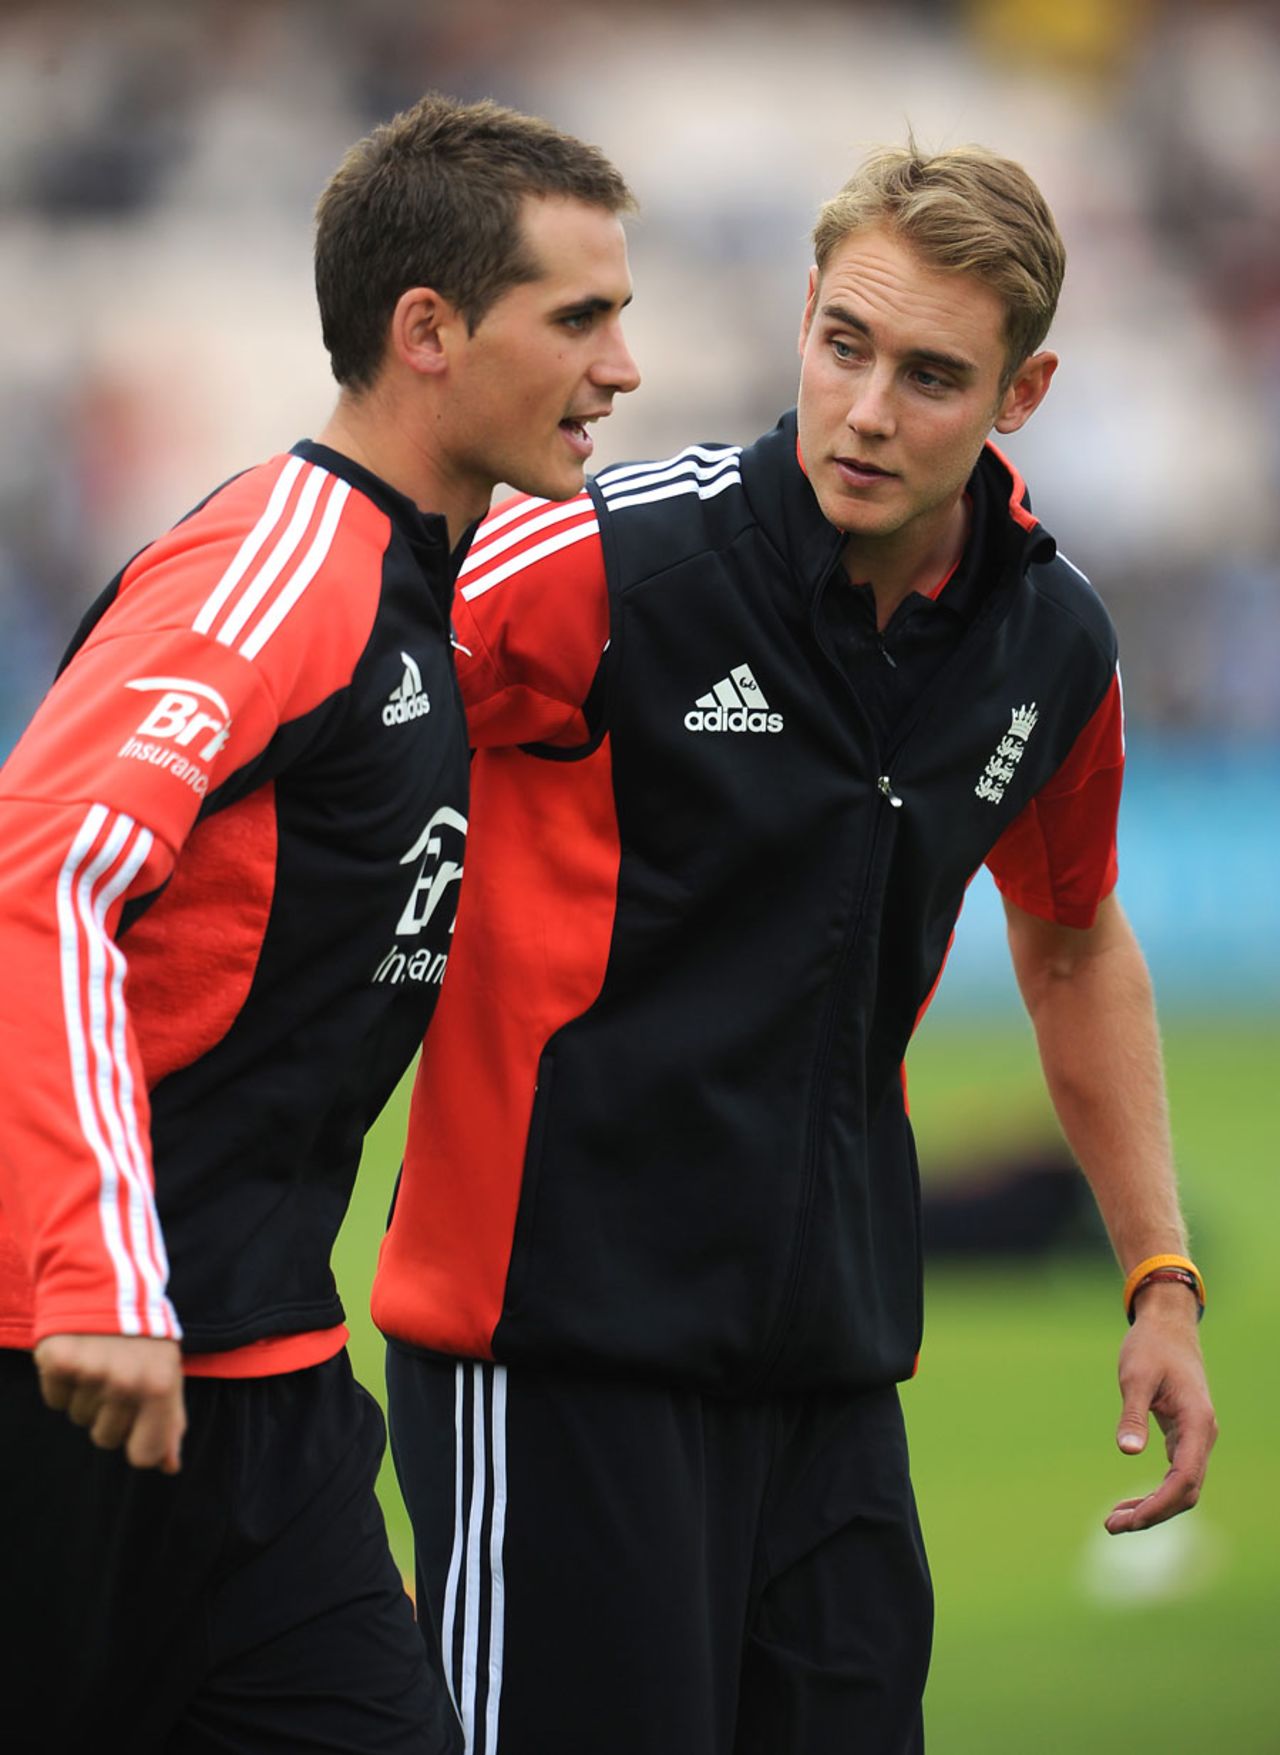 Stuart Broad chats to his Nottinghamshire colleague Alex Hales ahead of his Twenty20 debut, England v India, Twenty20, Old Trafford, August 31, 2011